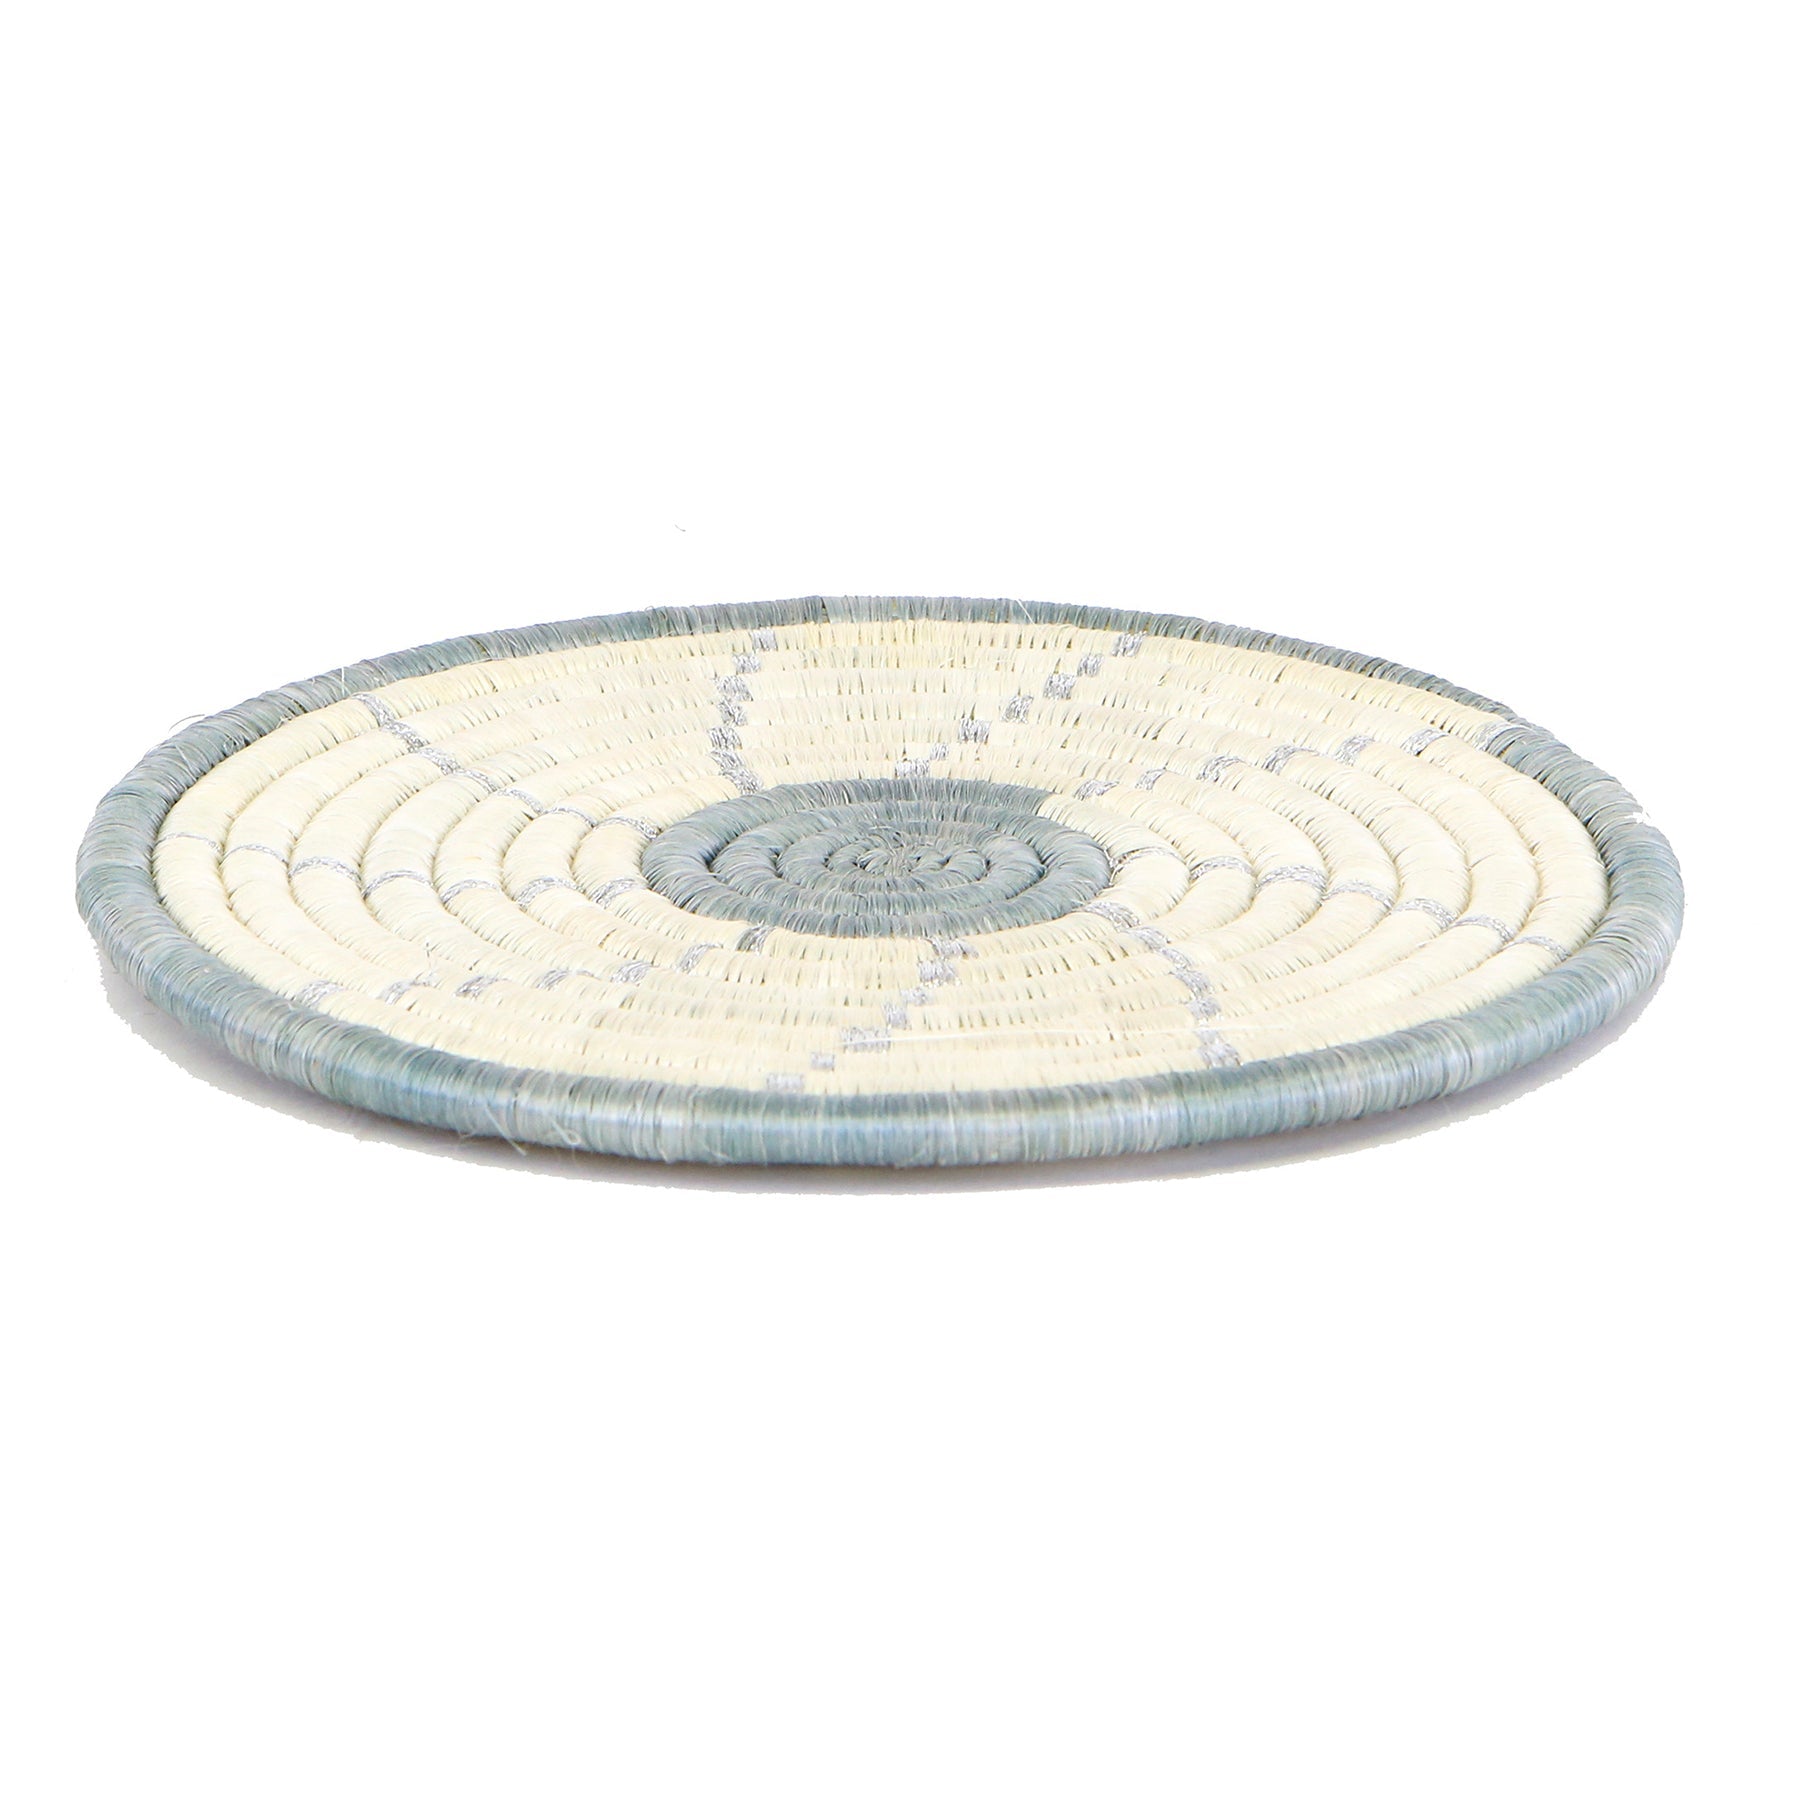  Holiday Table Plate - 10" Metallic Spiral by Kazi Goods - Wholesale Kazi Goods - Wholesale Perfumarie